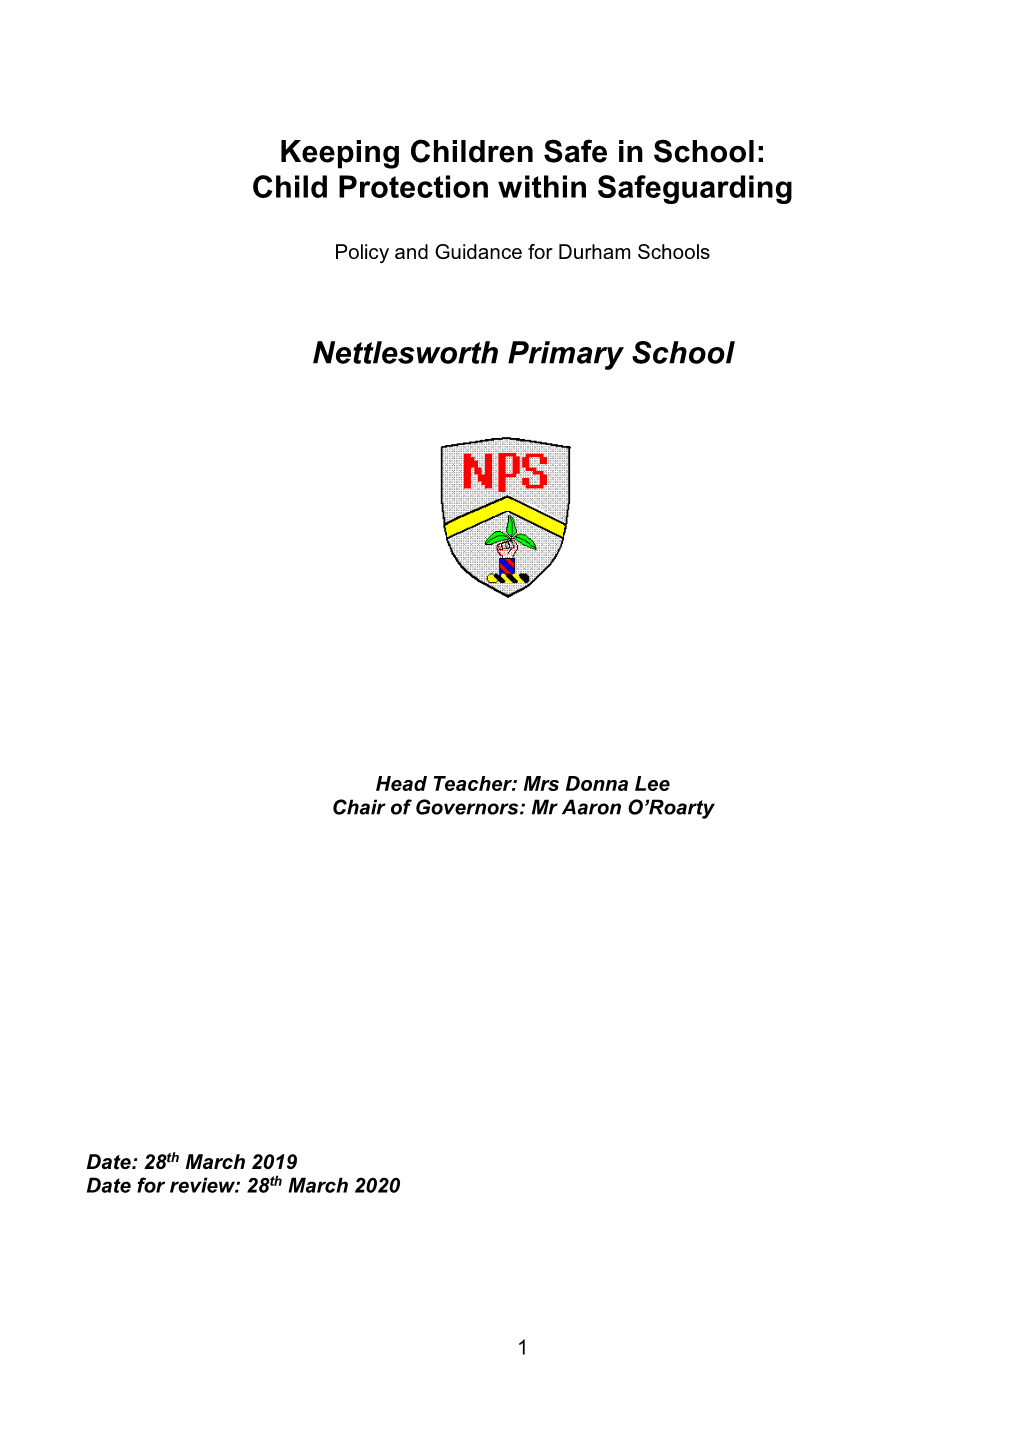 Keeping Children Safe in School: Child Protection Within Safeguarding Nettlesworth Primary School